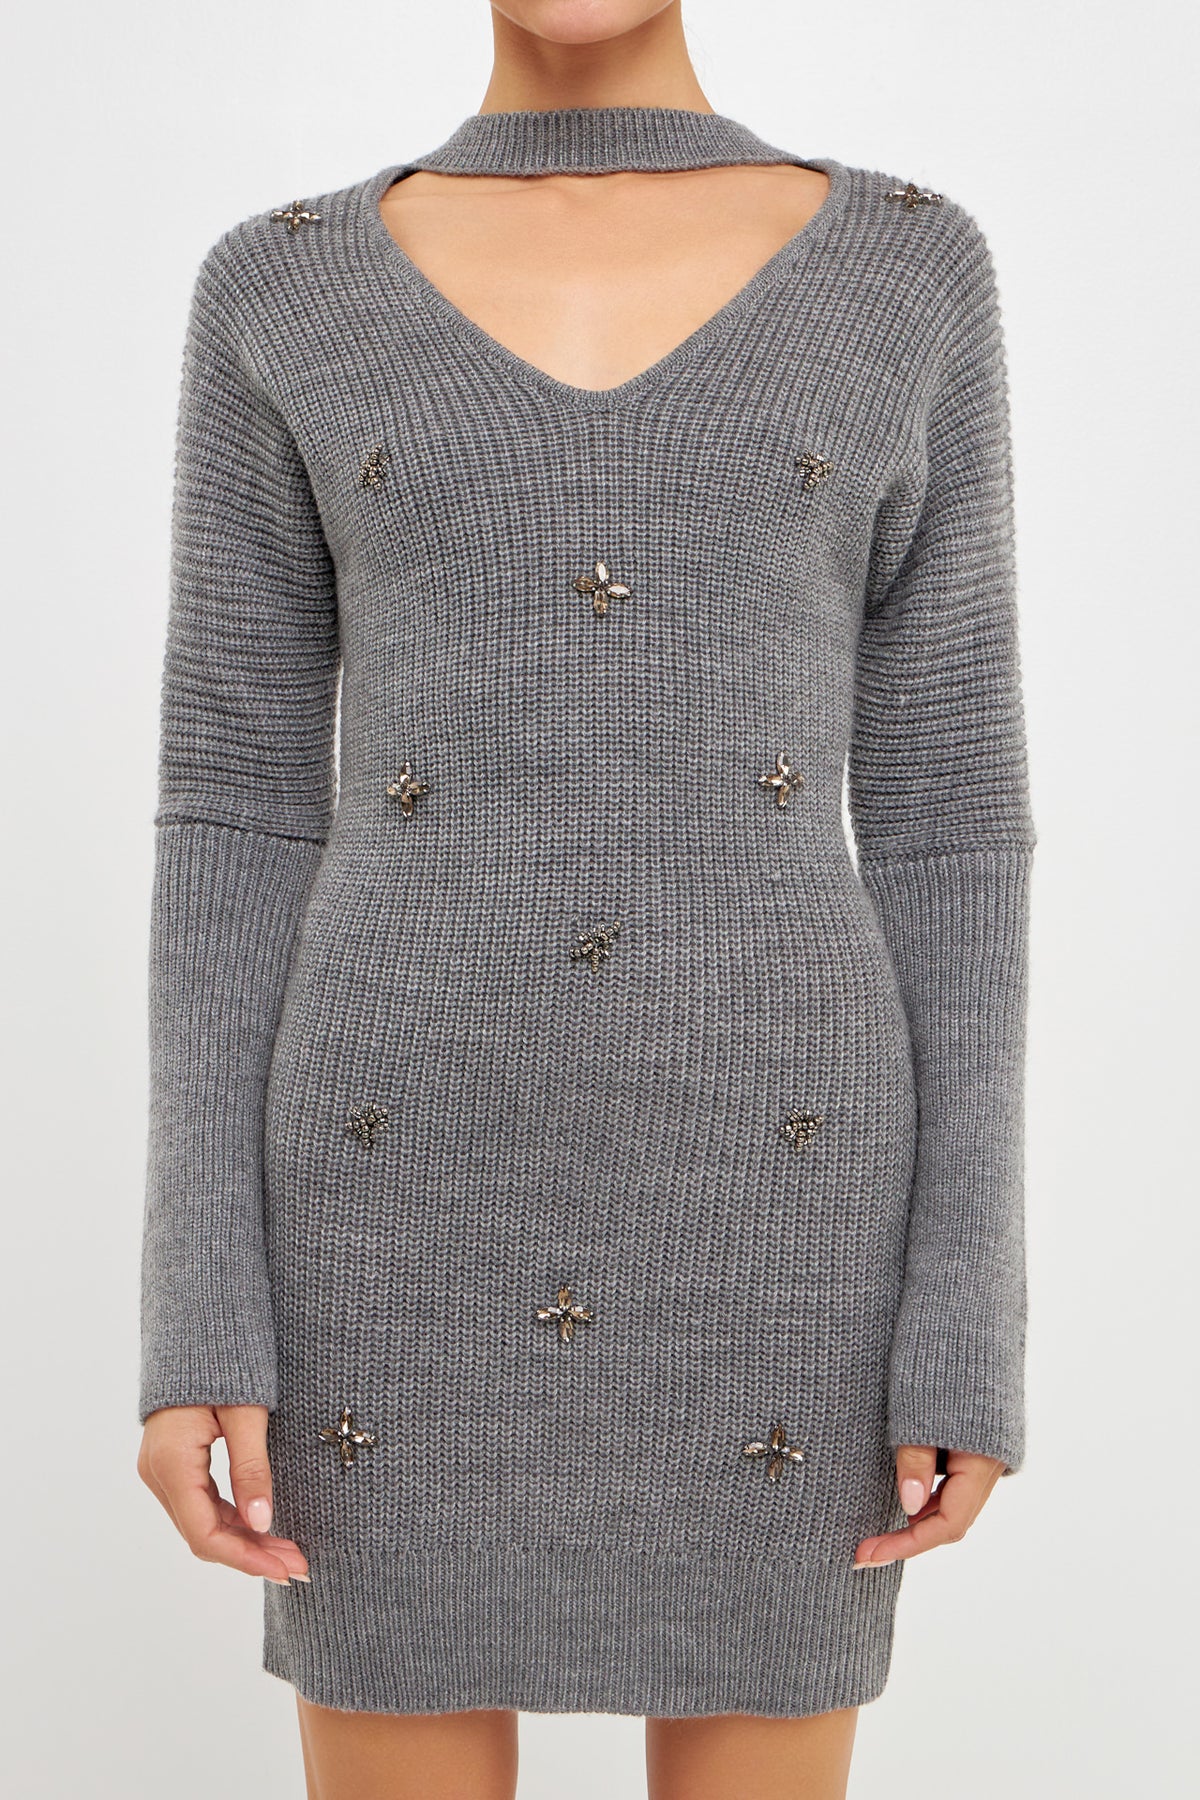 ENDLESS ROSE - Embellished Sweater Dress - DRESSES available at Objectrare